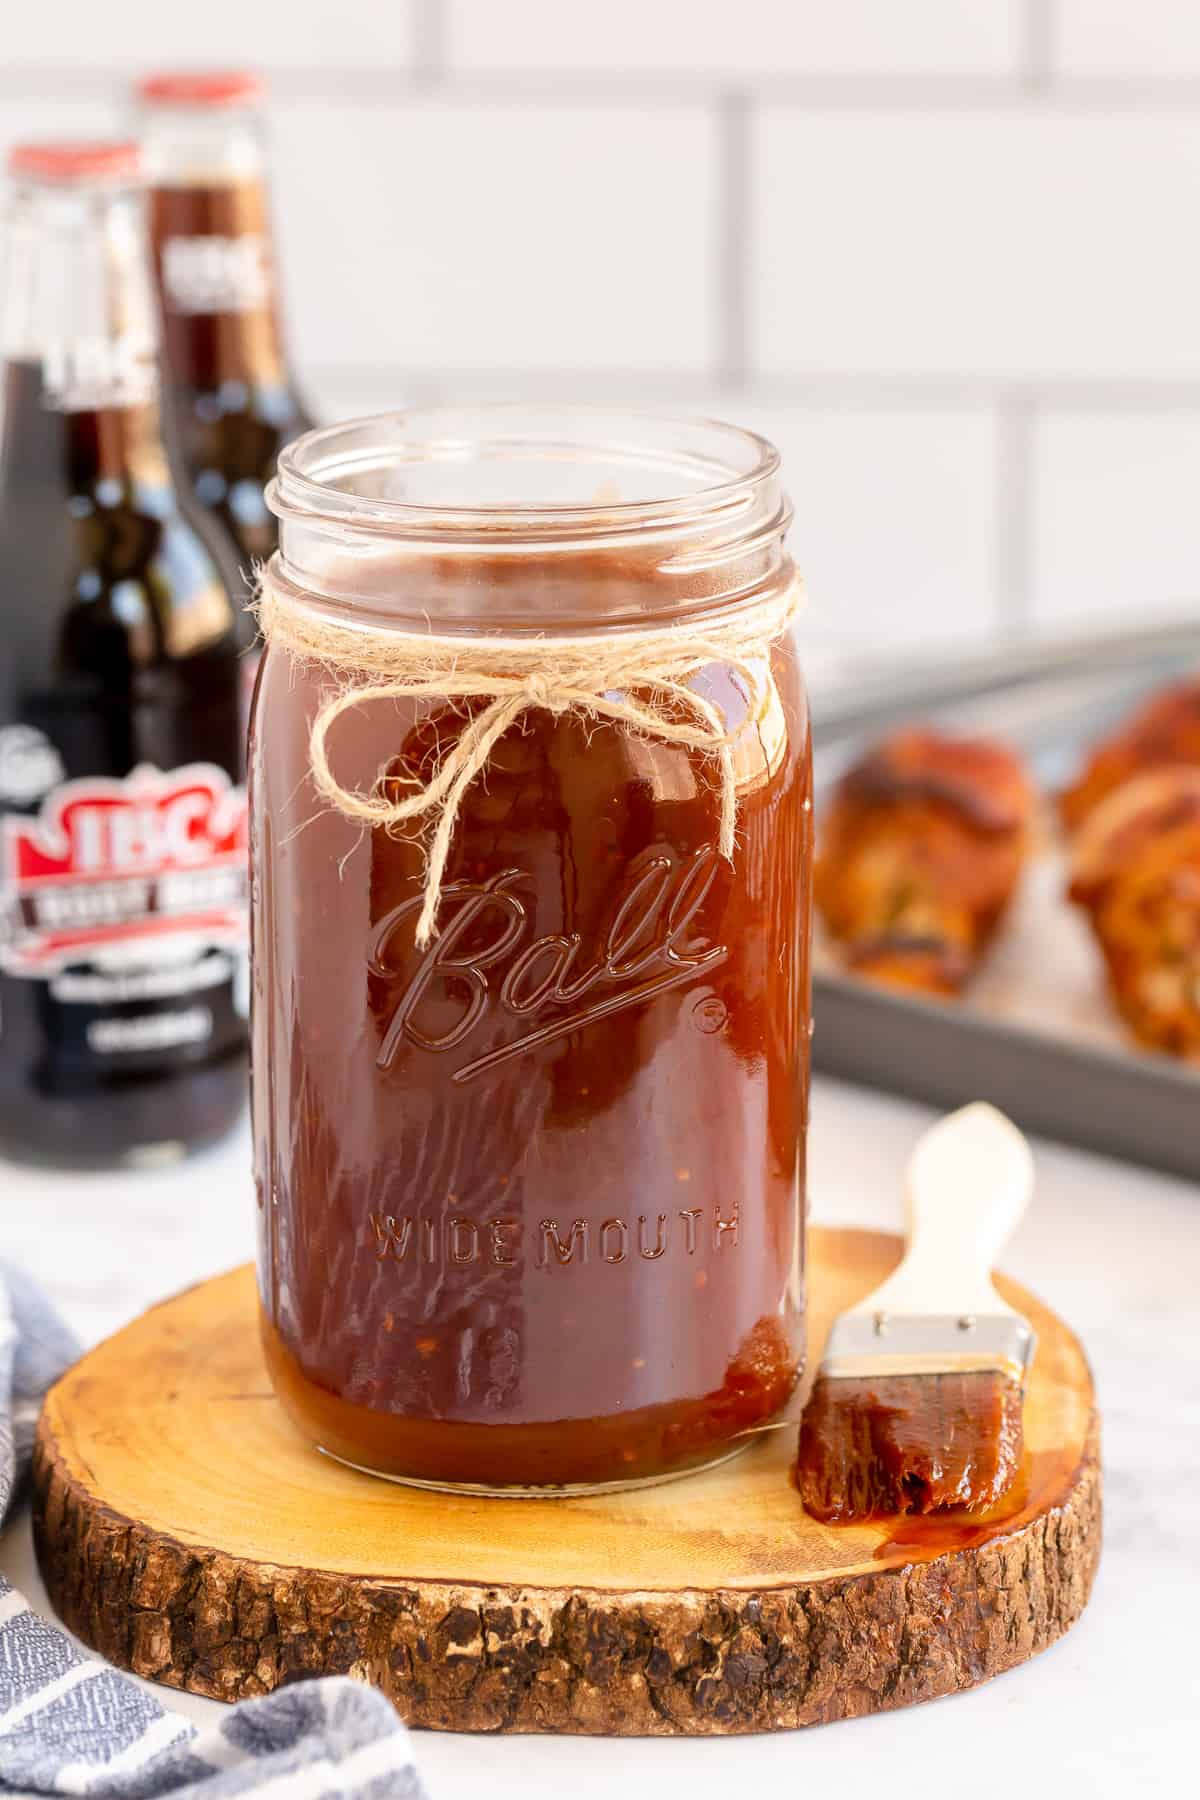 A pastry brush rests next to a mason jar filled with BBQ sauce.